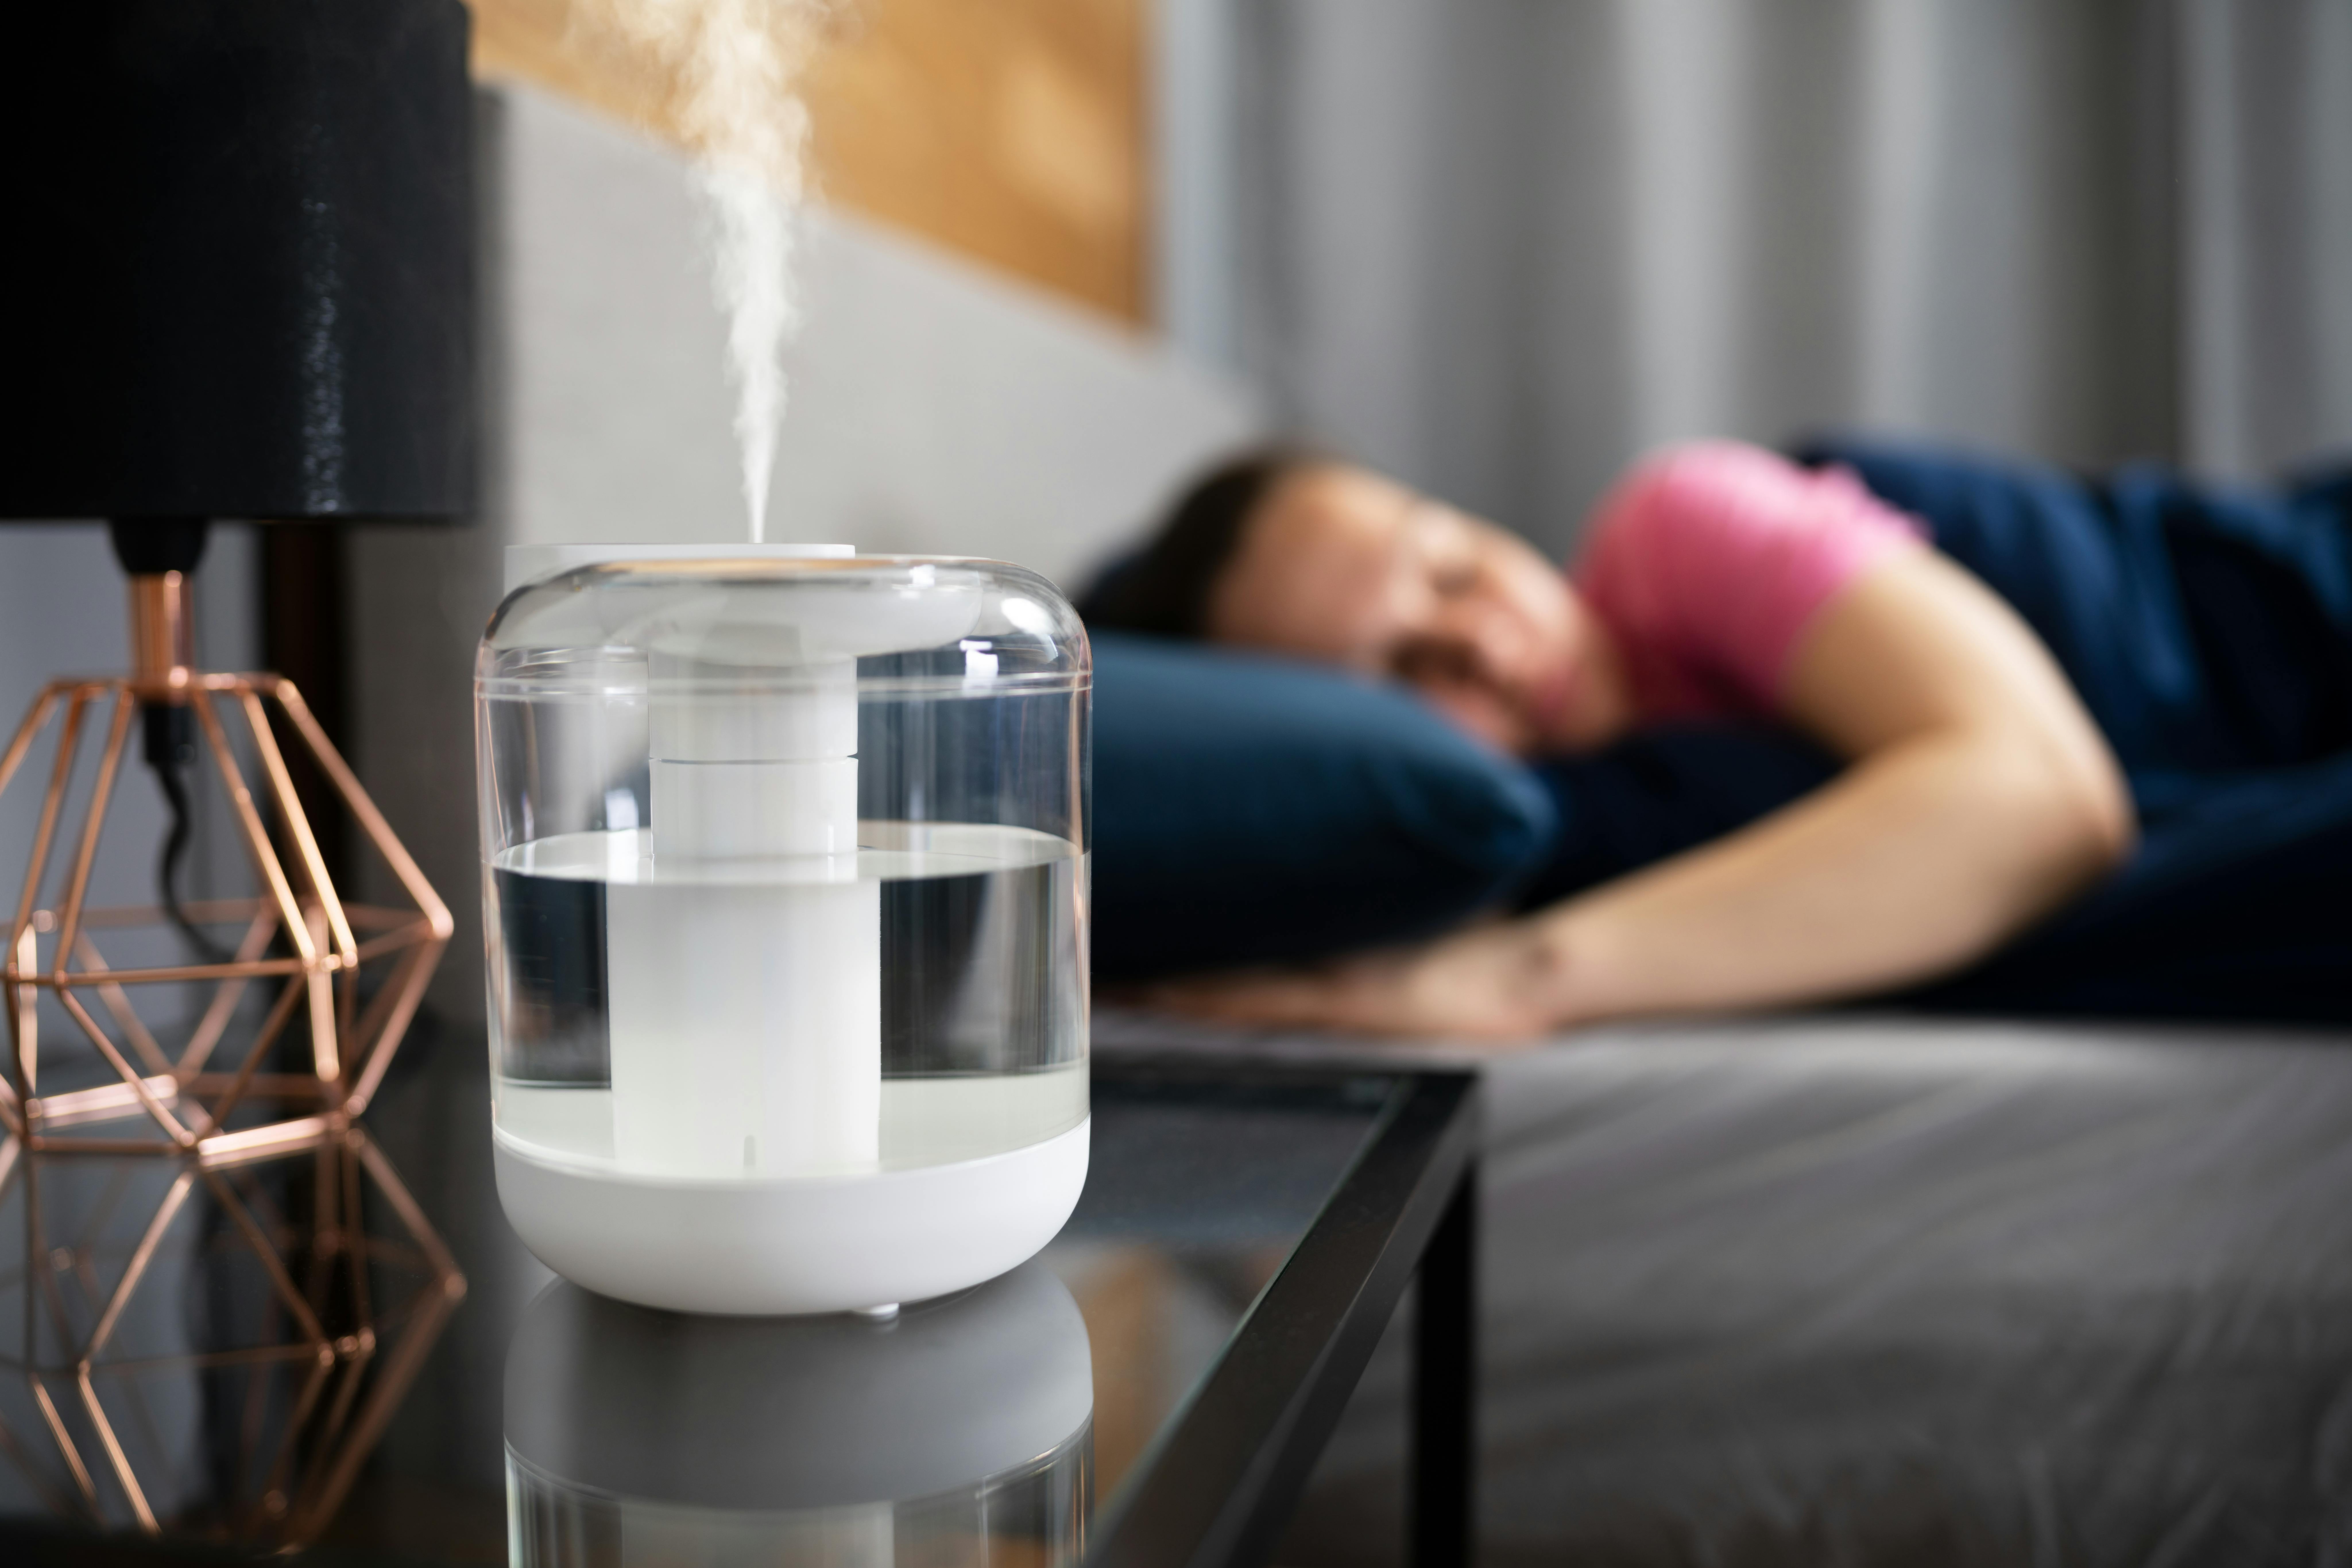 A young woman sleeps in bed with a humidifier running nearby.